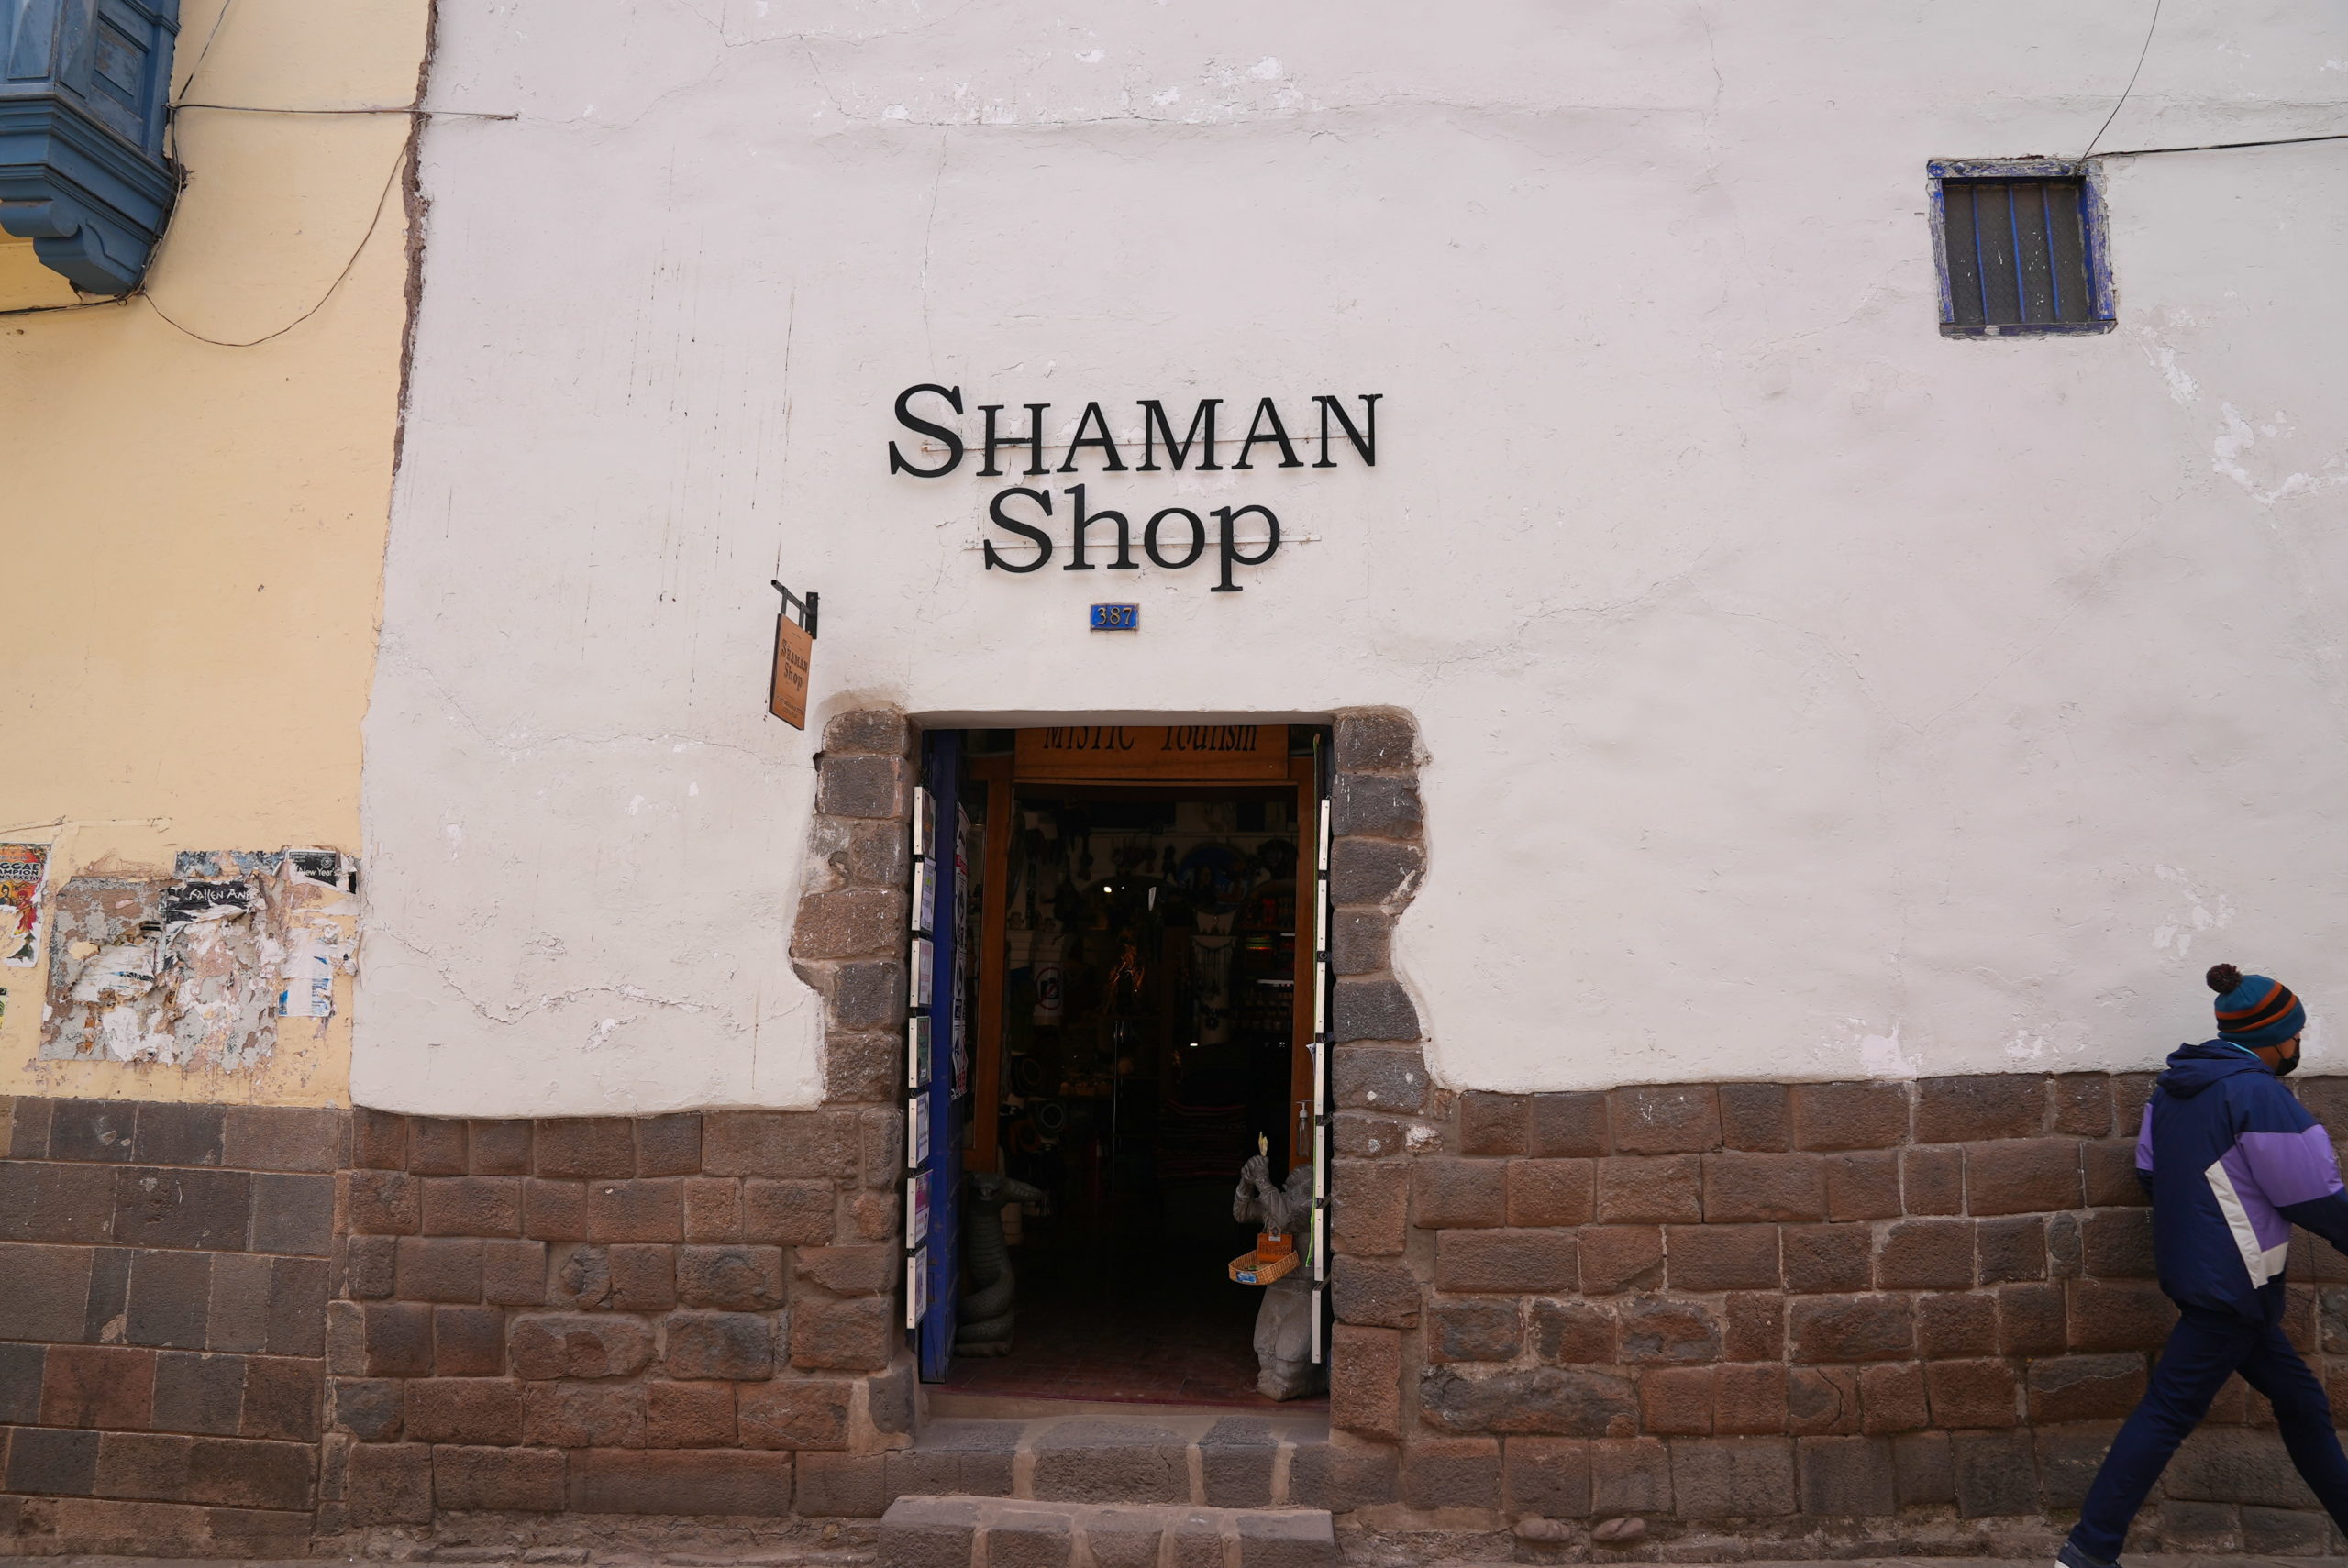 This is not the Shaman Shop you are looking for.  Move along.